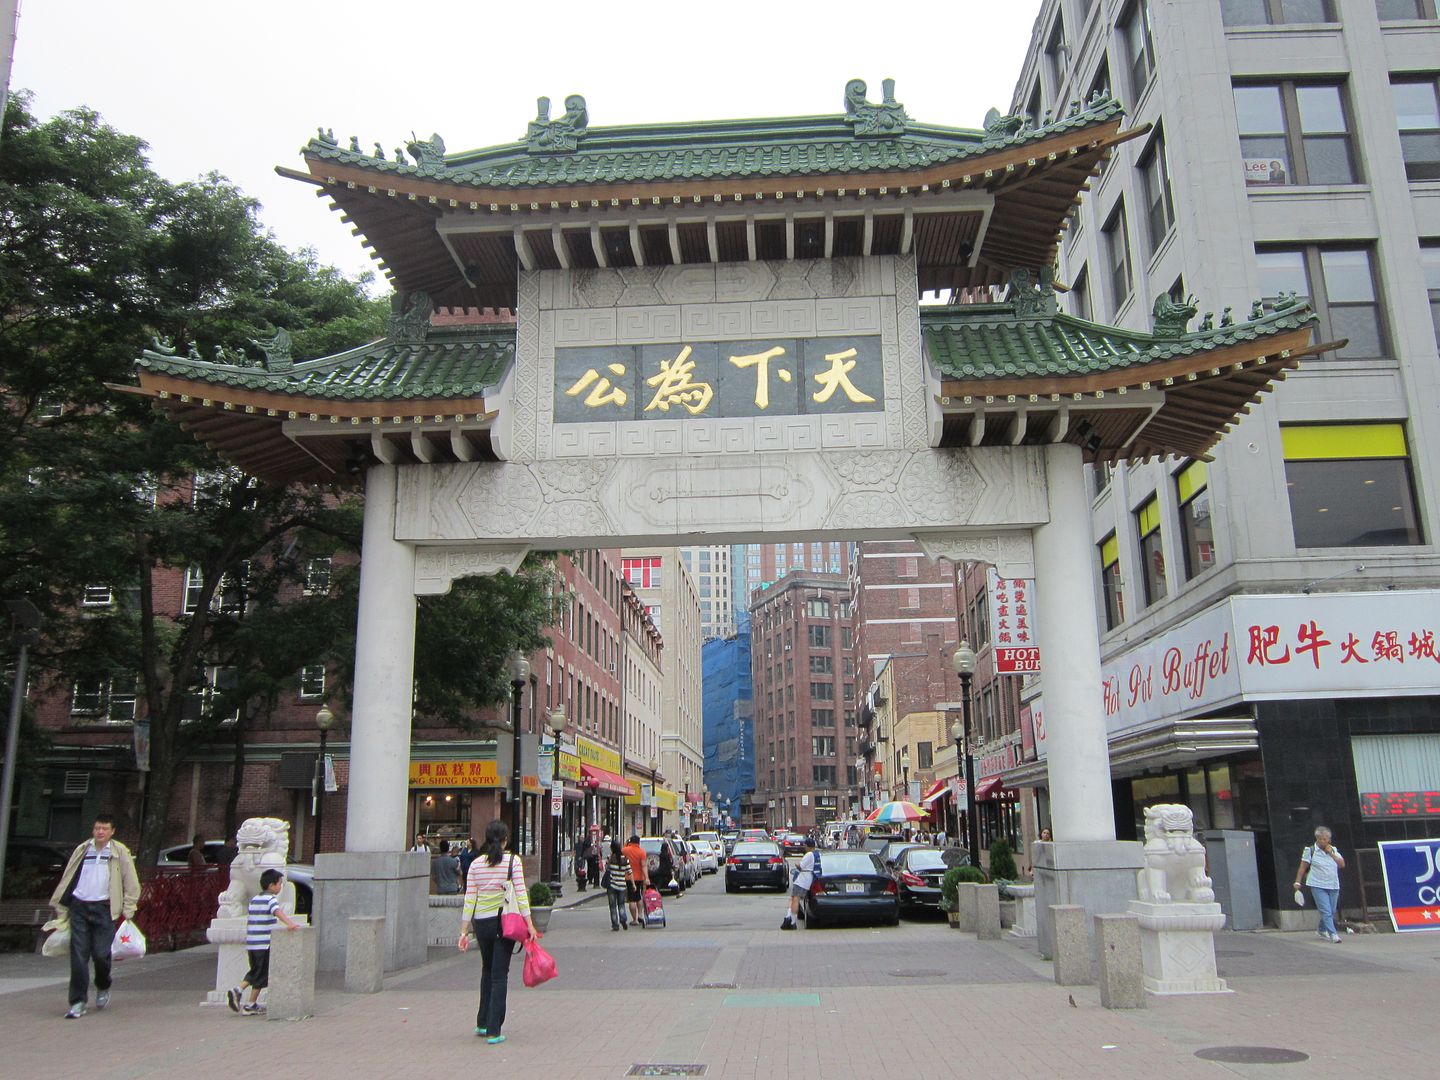 2013 Road Trip Photos #14: It’s Chinatown! « Midlife Crisis Crossover!